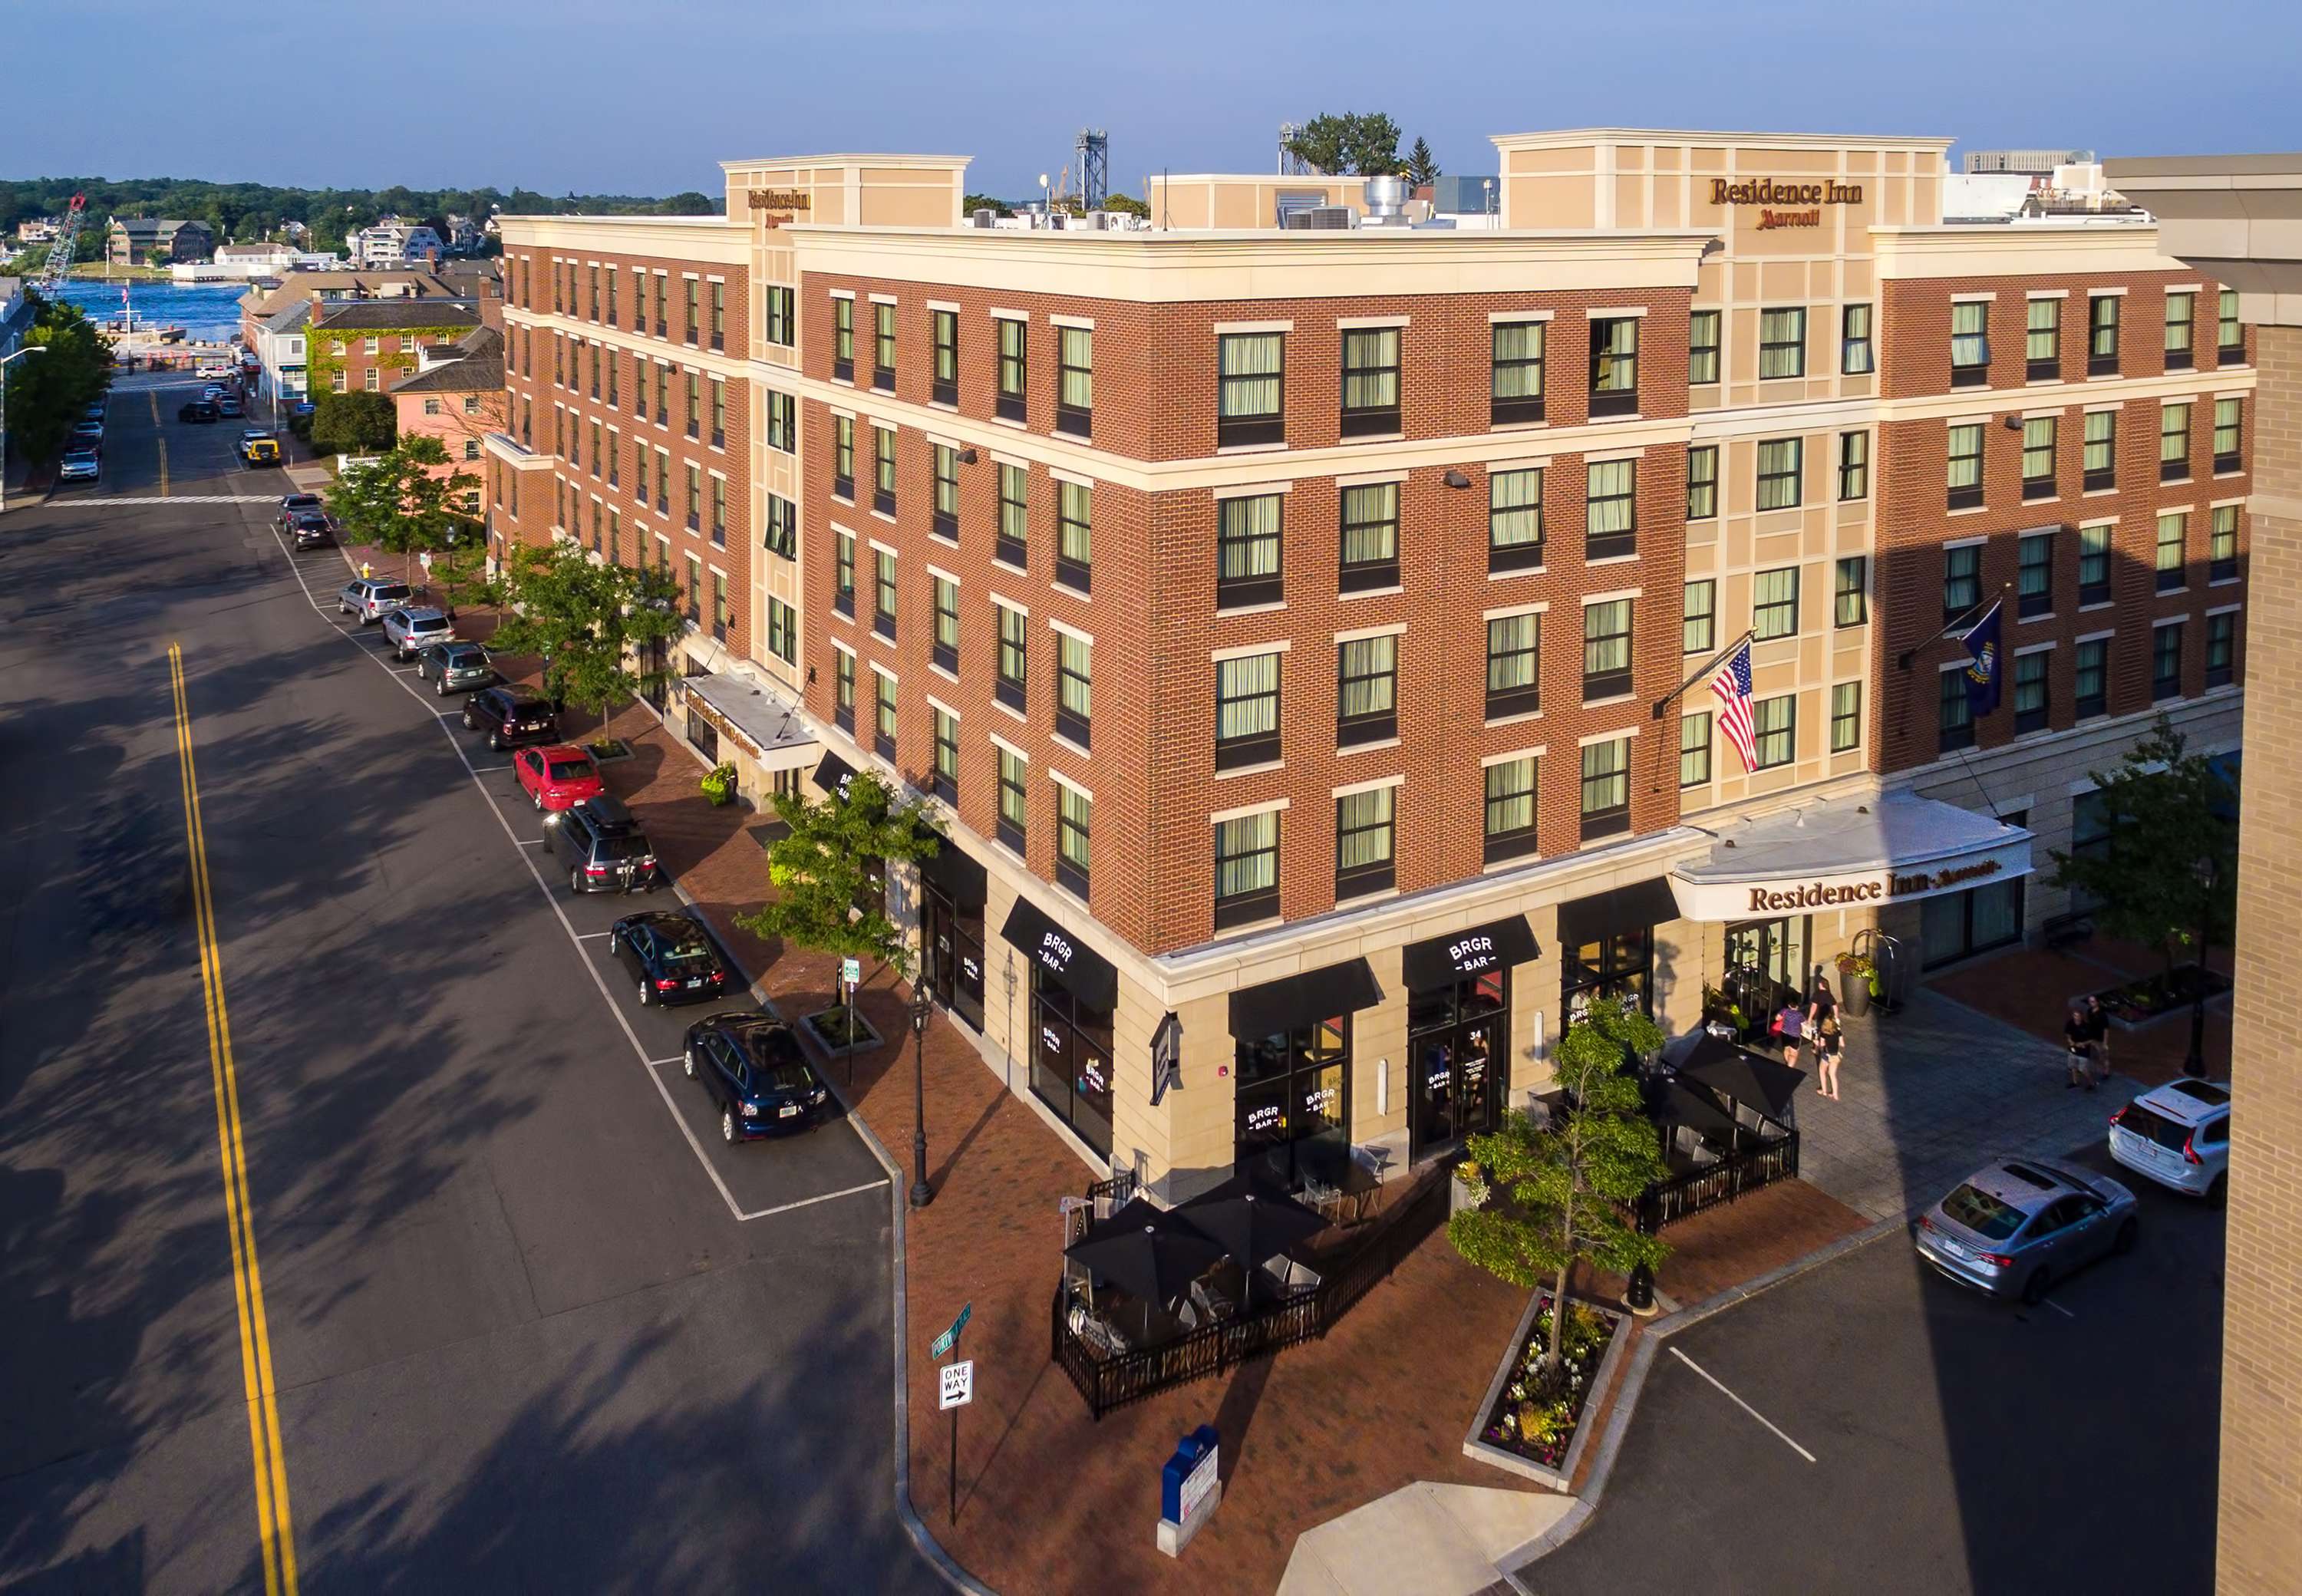 Photo of Residence Inn Portsmouth Downtown/Waterfront, Portsmouth, NH